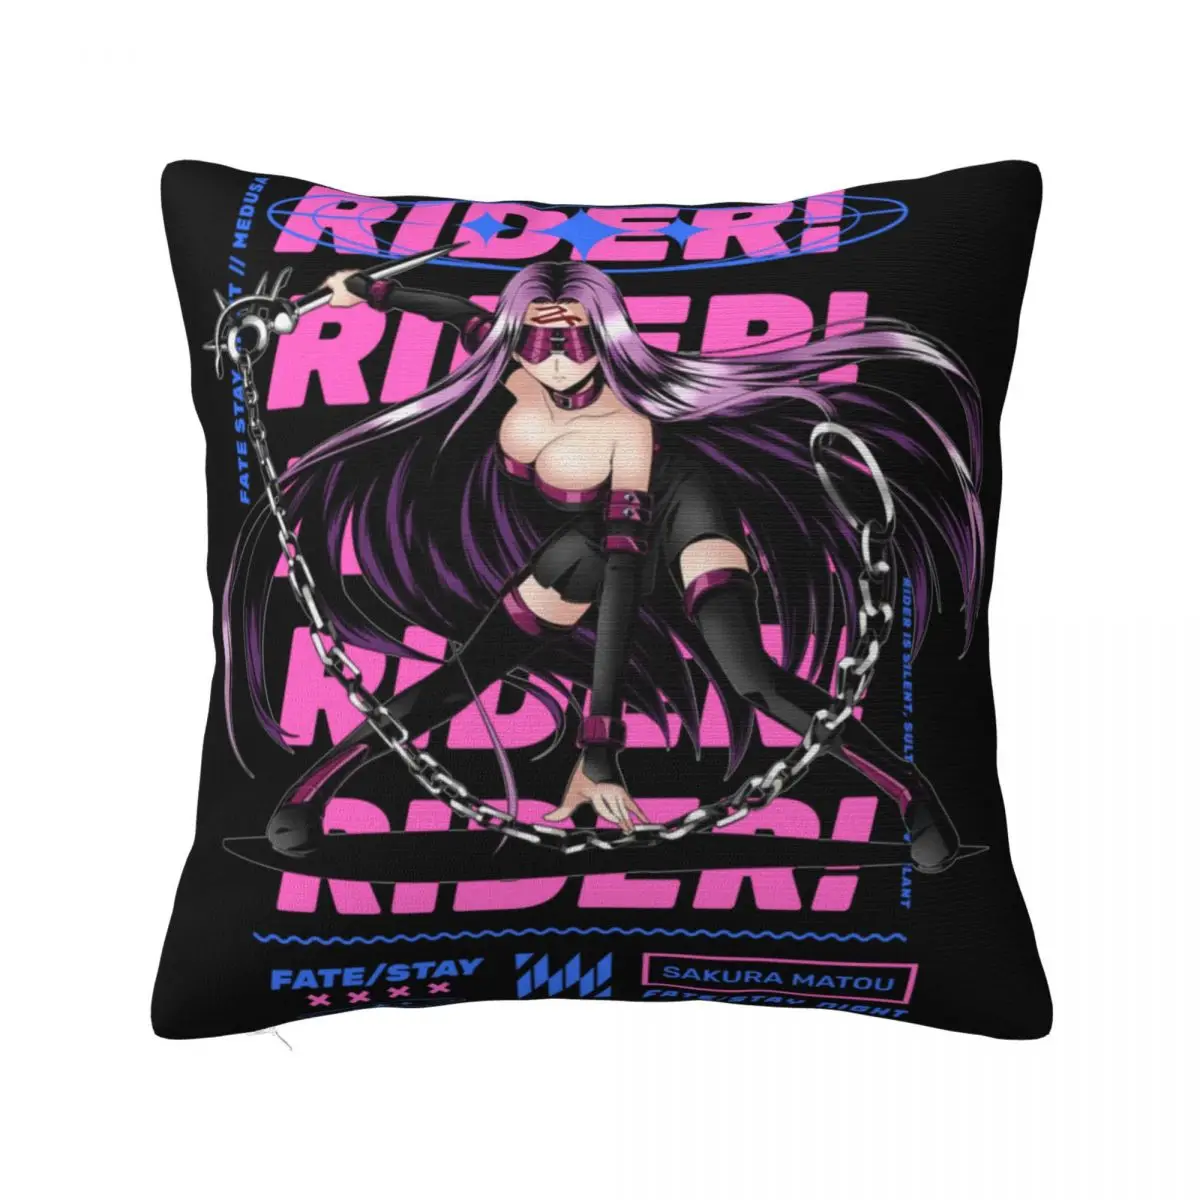 

Decorative Pillow Cover Medusa Rider Fate Zero Product Bed Fate Stay Night Anime Pillowcase Zipper Multiple Sizes Dropshipping